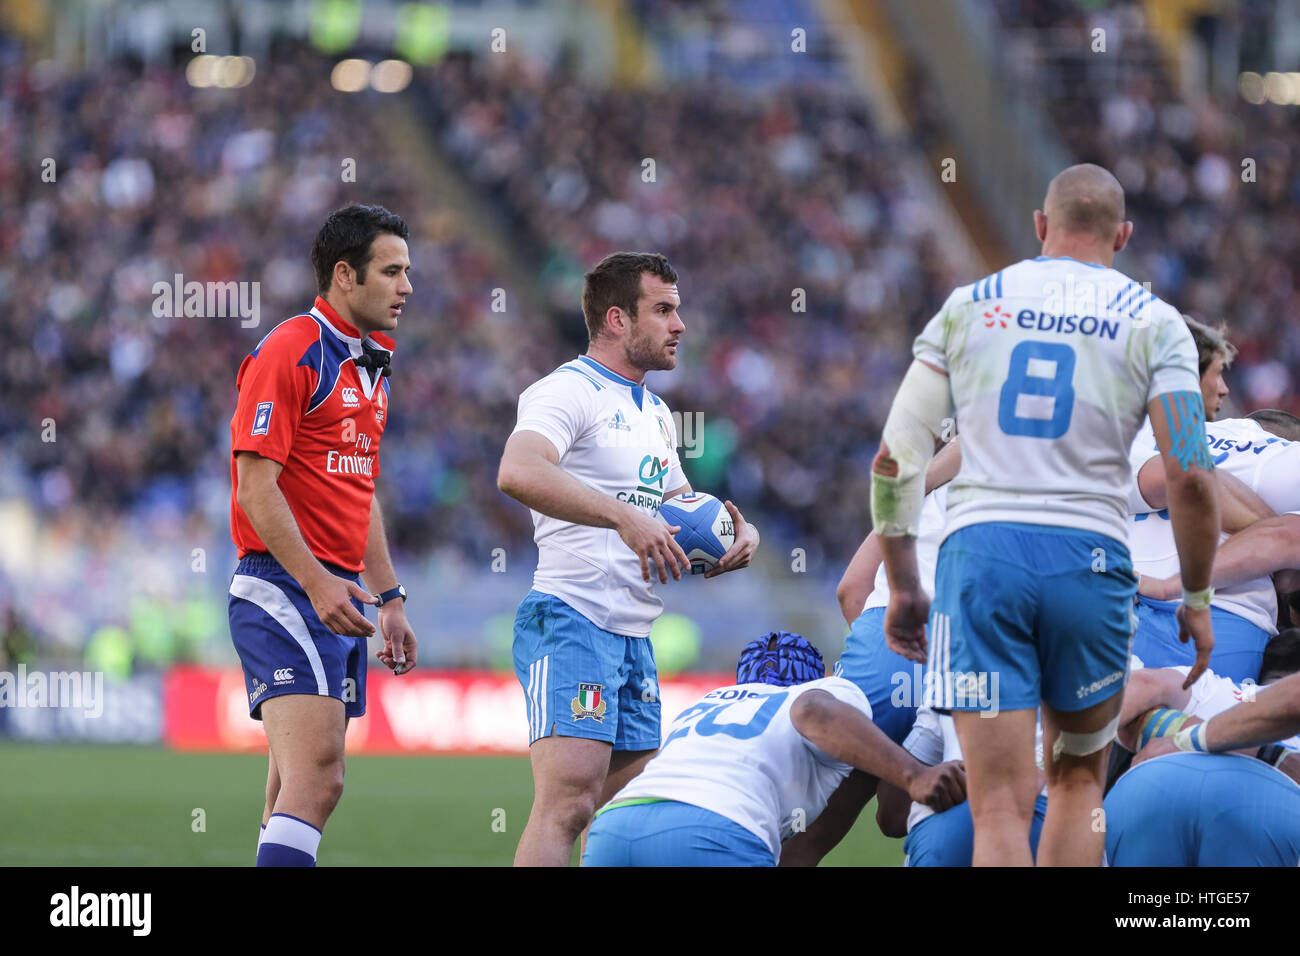 Rome, Italy. 11th Mar, 2017. Italy's scrum half Giorgio Bronzini is ready for the put-in scrum in the rugby match against Italy in RBS 6Nations  Credit: Massimiliano Carnabuci/Alamy Live News Stock Photo